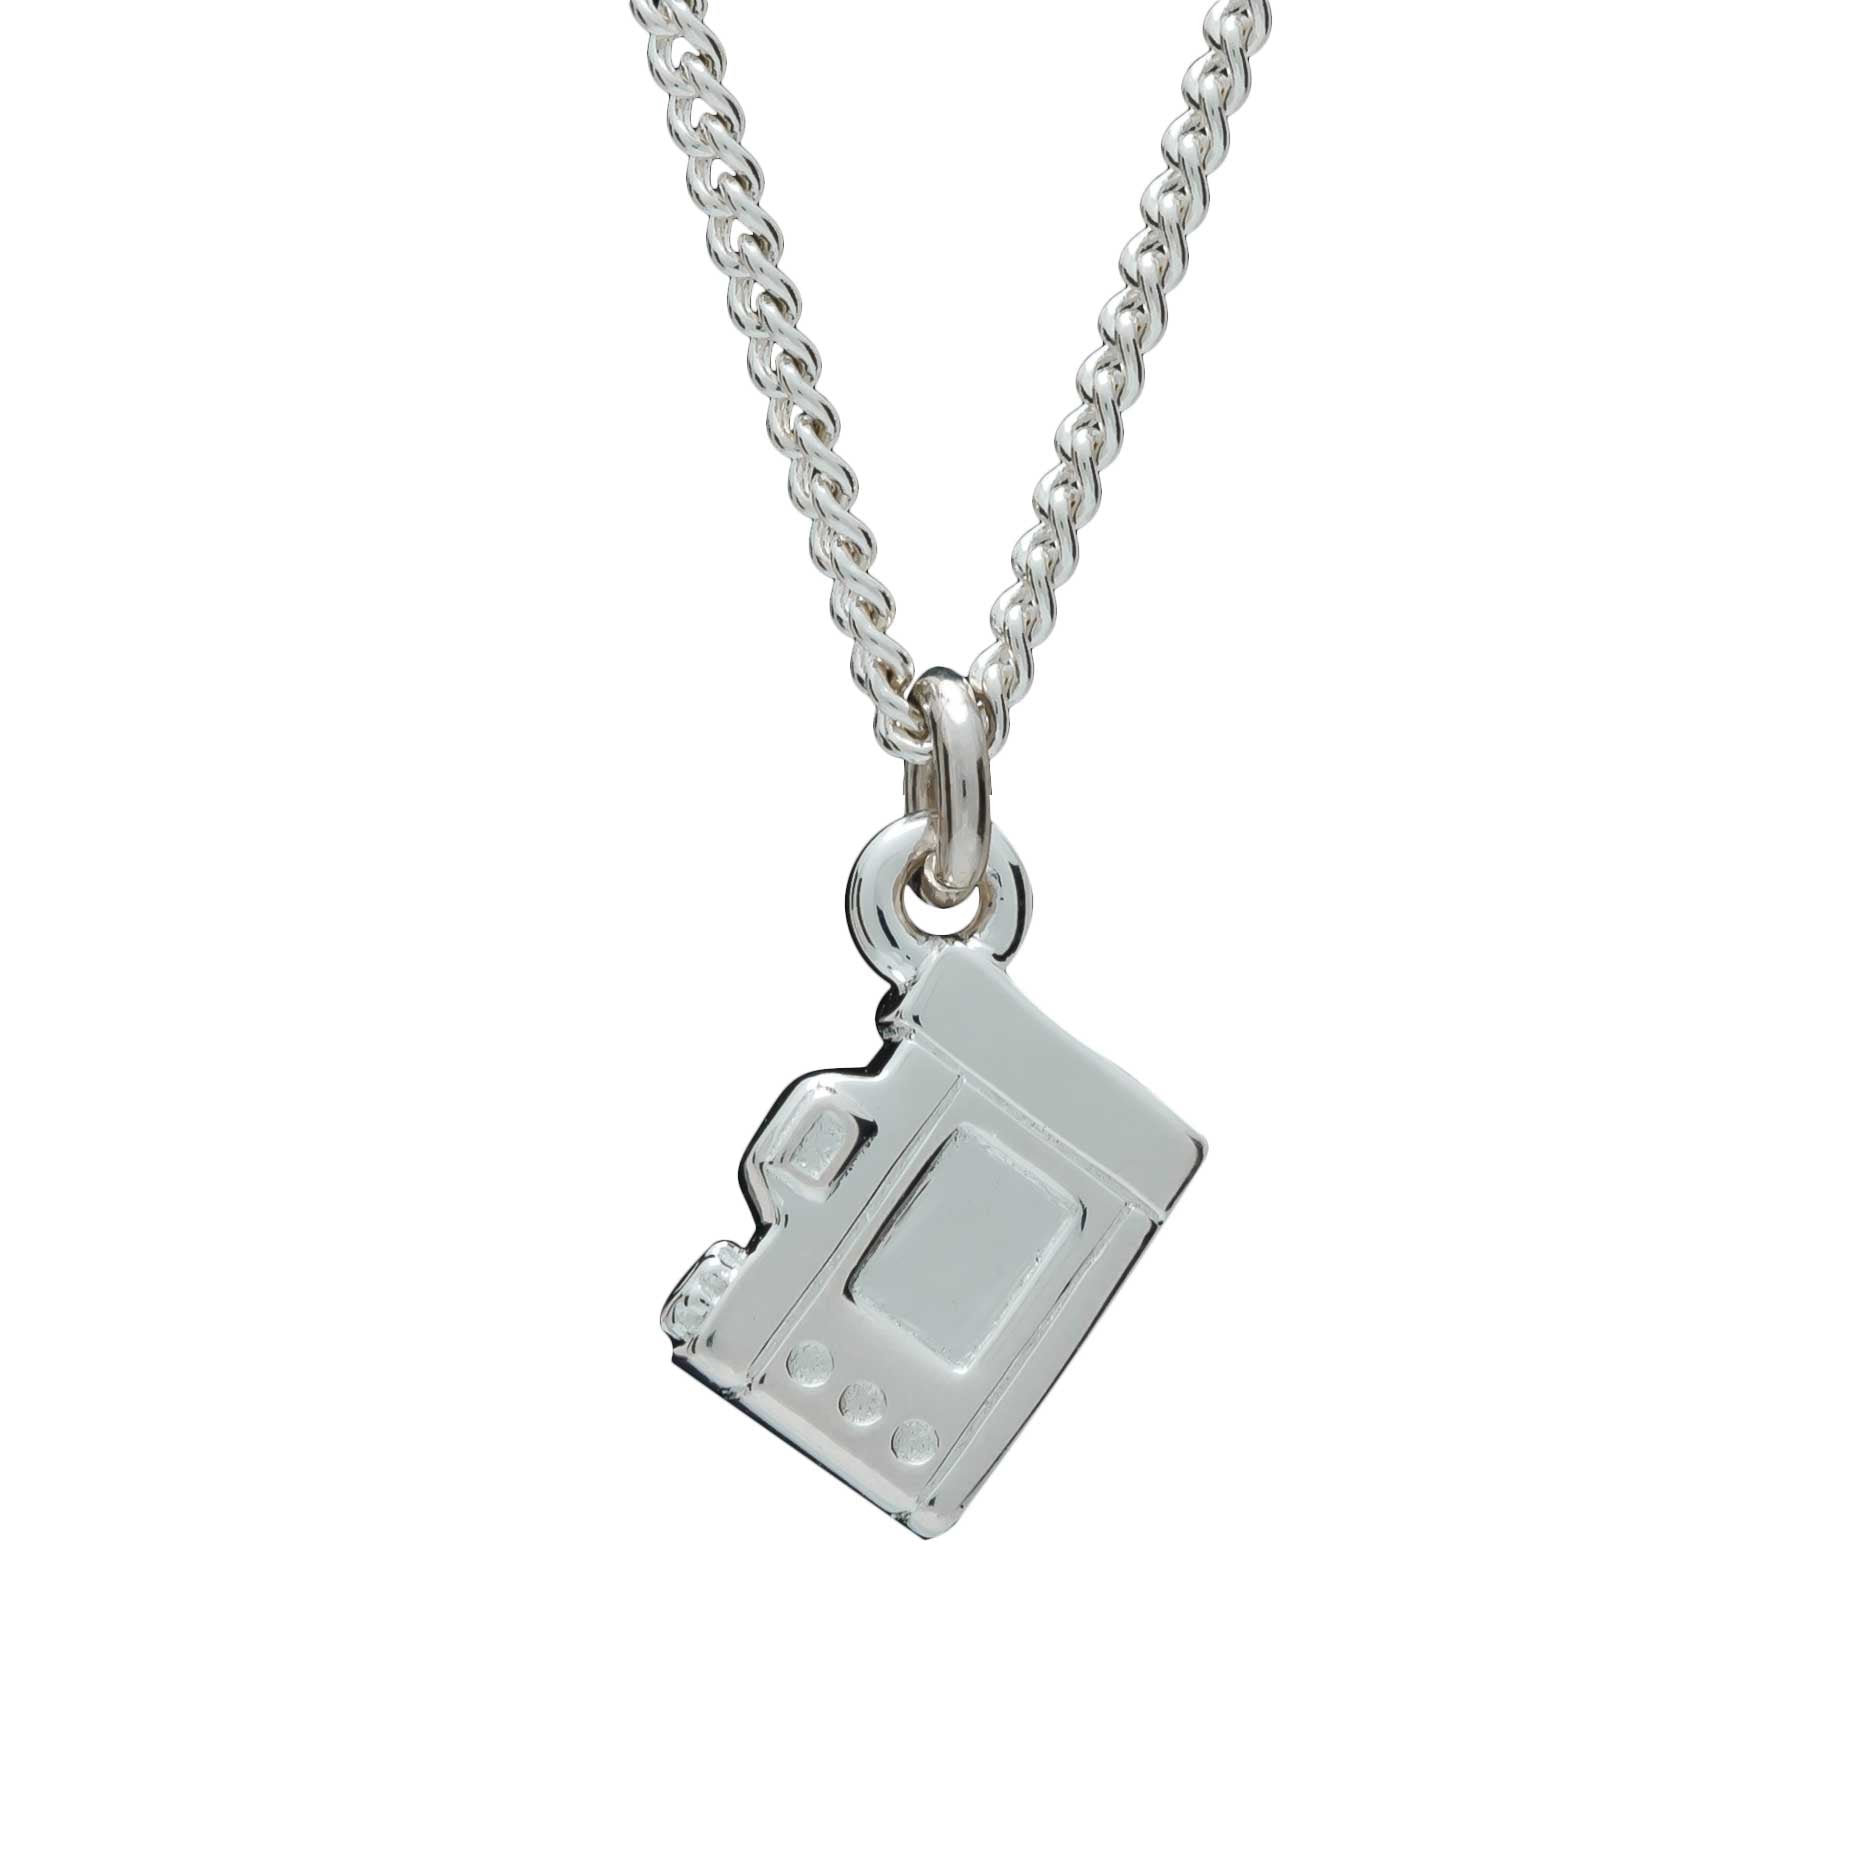 Camera Silver Necklace - Vintage SLR Camera Pendant screen side curb chain